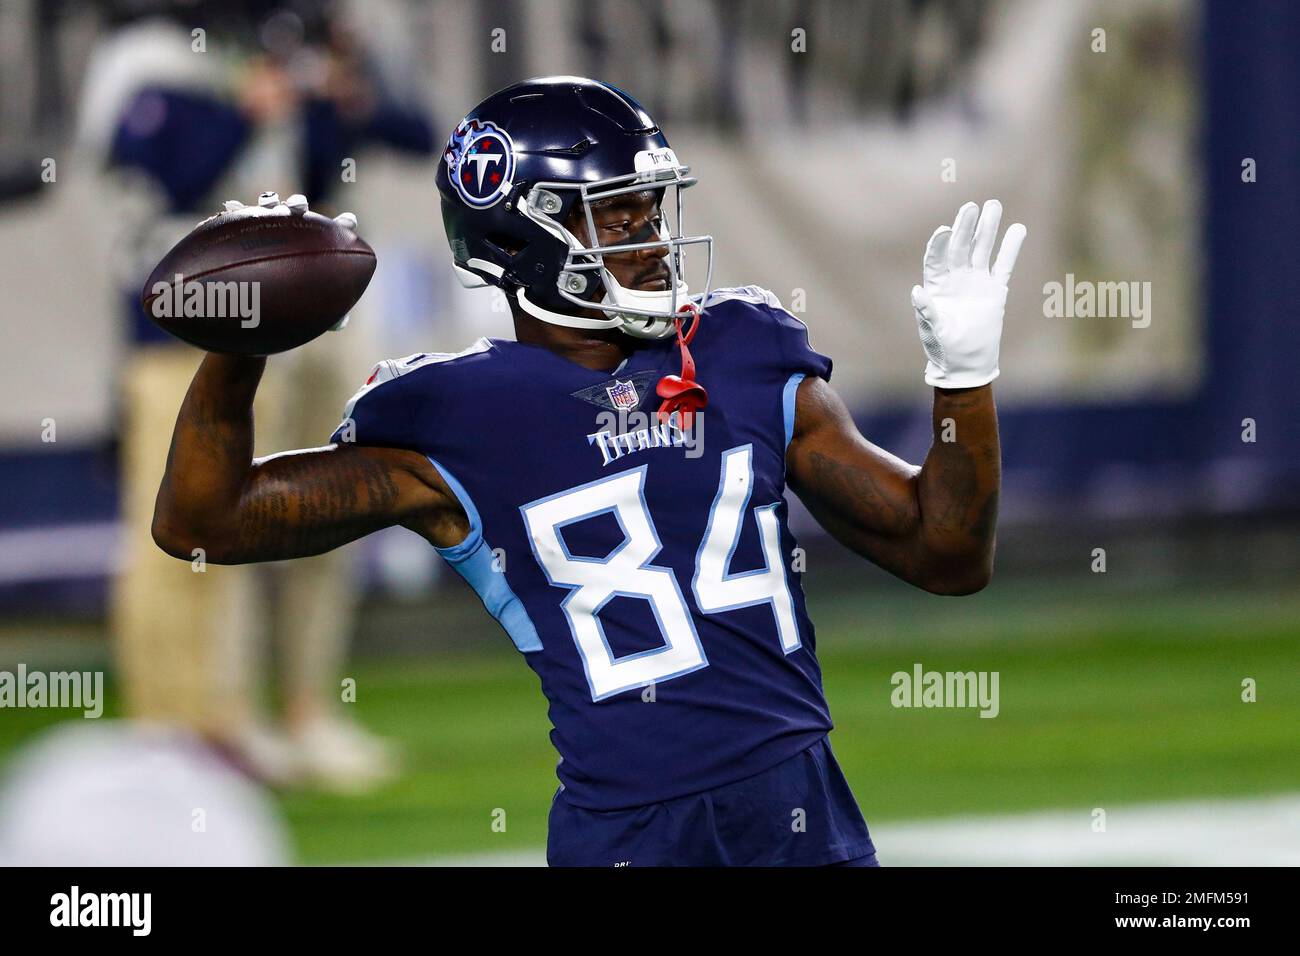 Tennessee Titans wide receiver Corey Davis warms up before an NFL football  game against the Indianapolis Colts Thursday, Nov. 12, 2020, in Nashville,  Tenn. (AP Photo/Wade Payne Stock Photo - Alamy